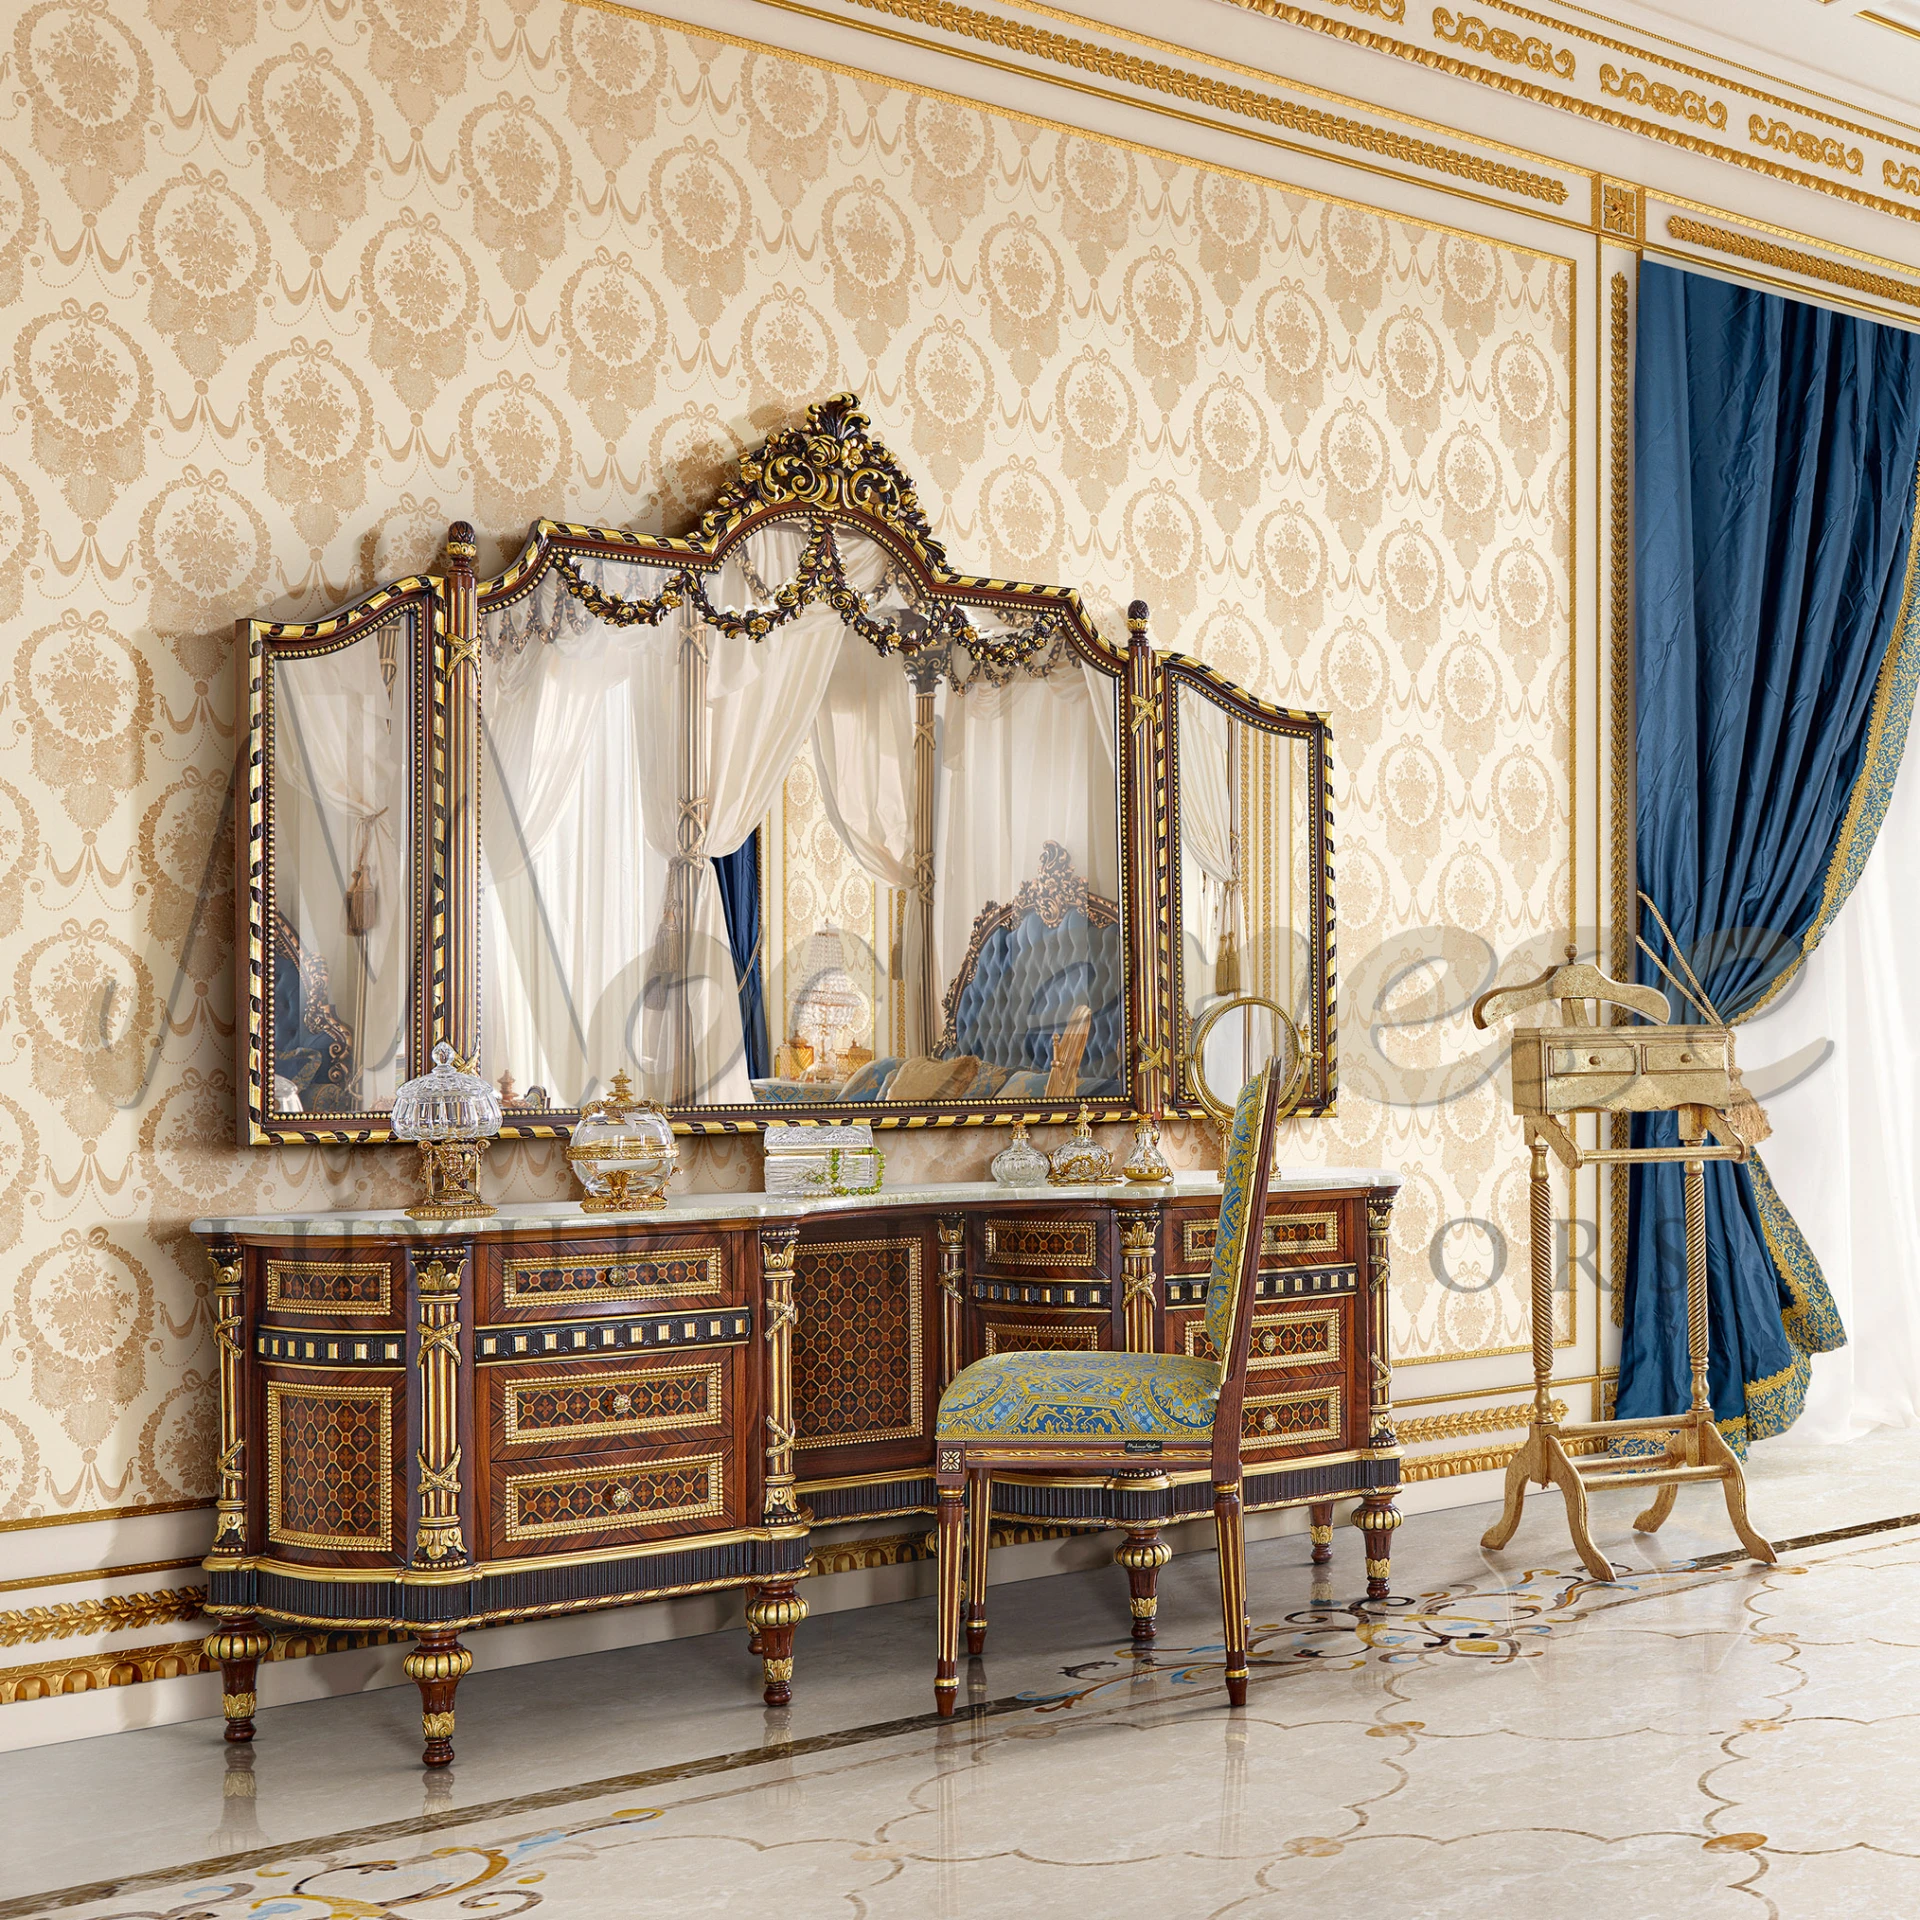 Detailed view of a white and gold table with a decorative floral design with Baroque Chair with fancy fabric.